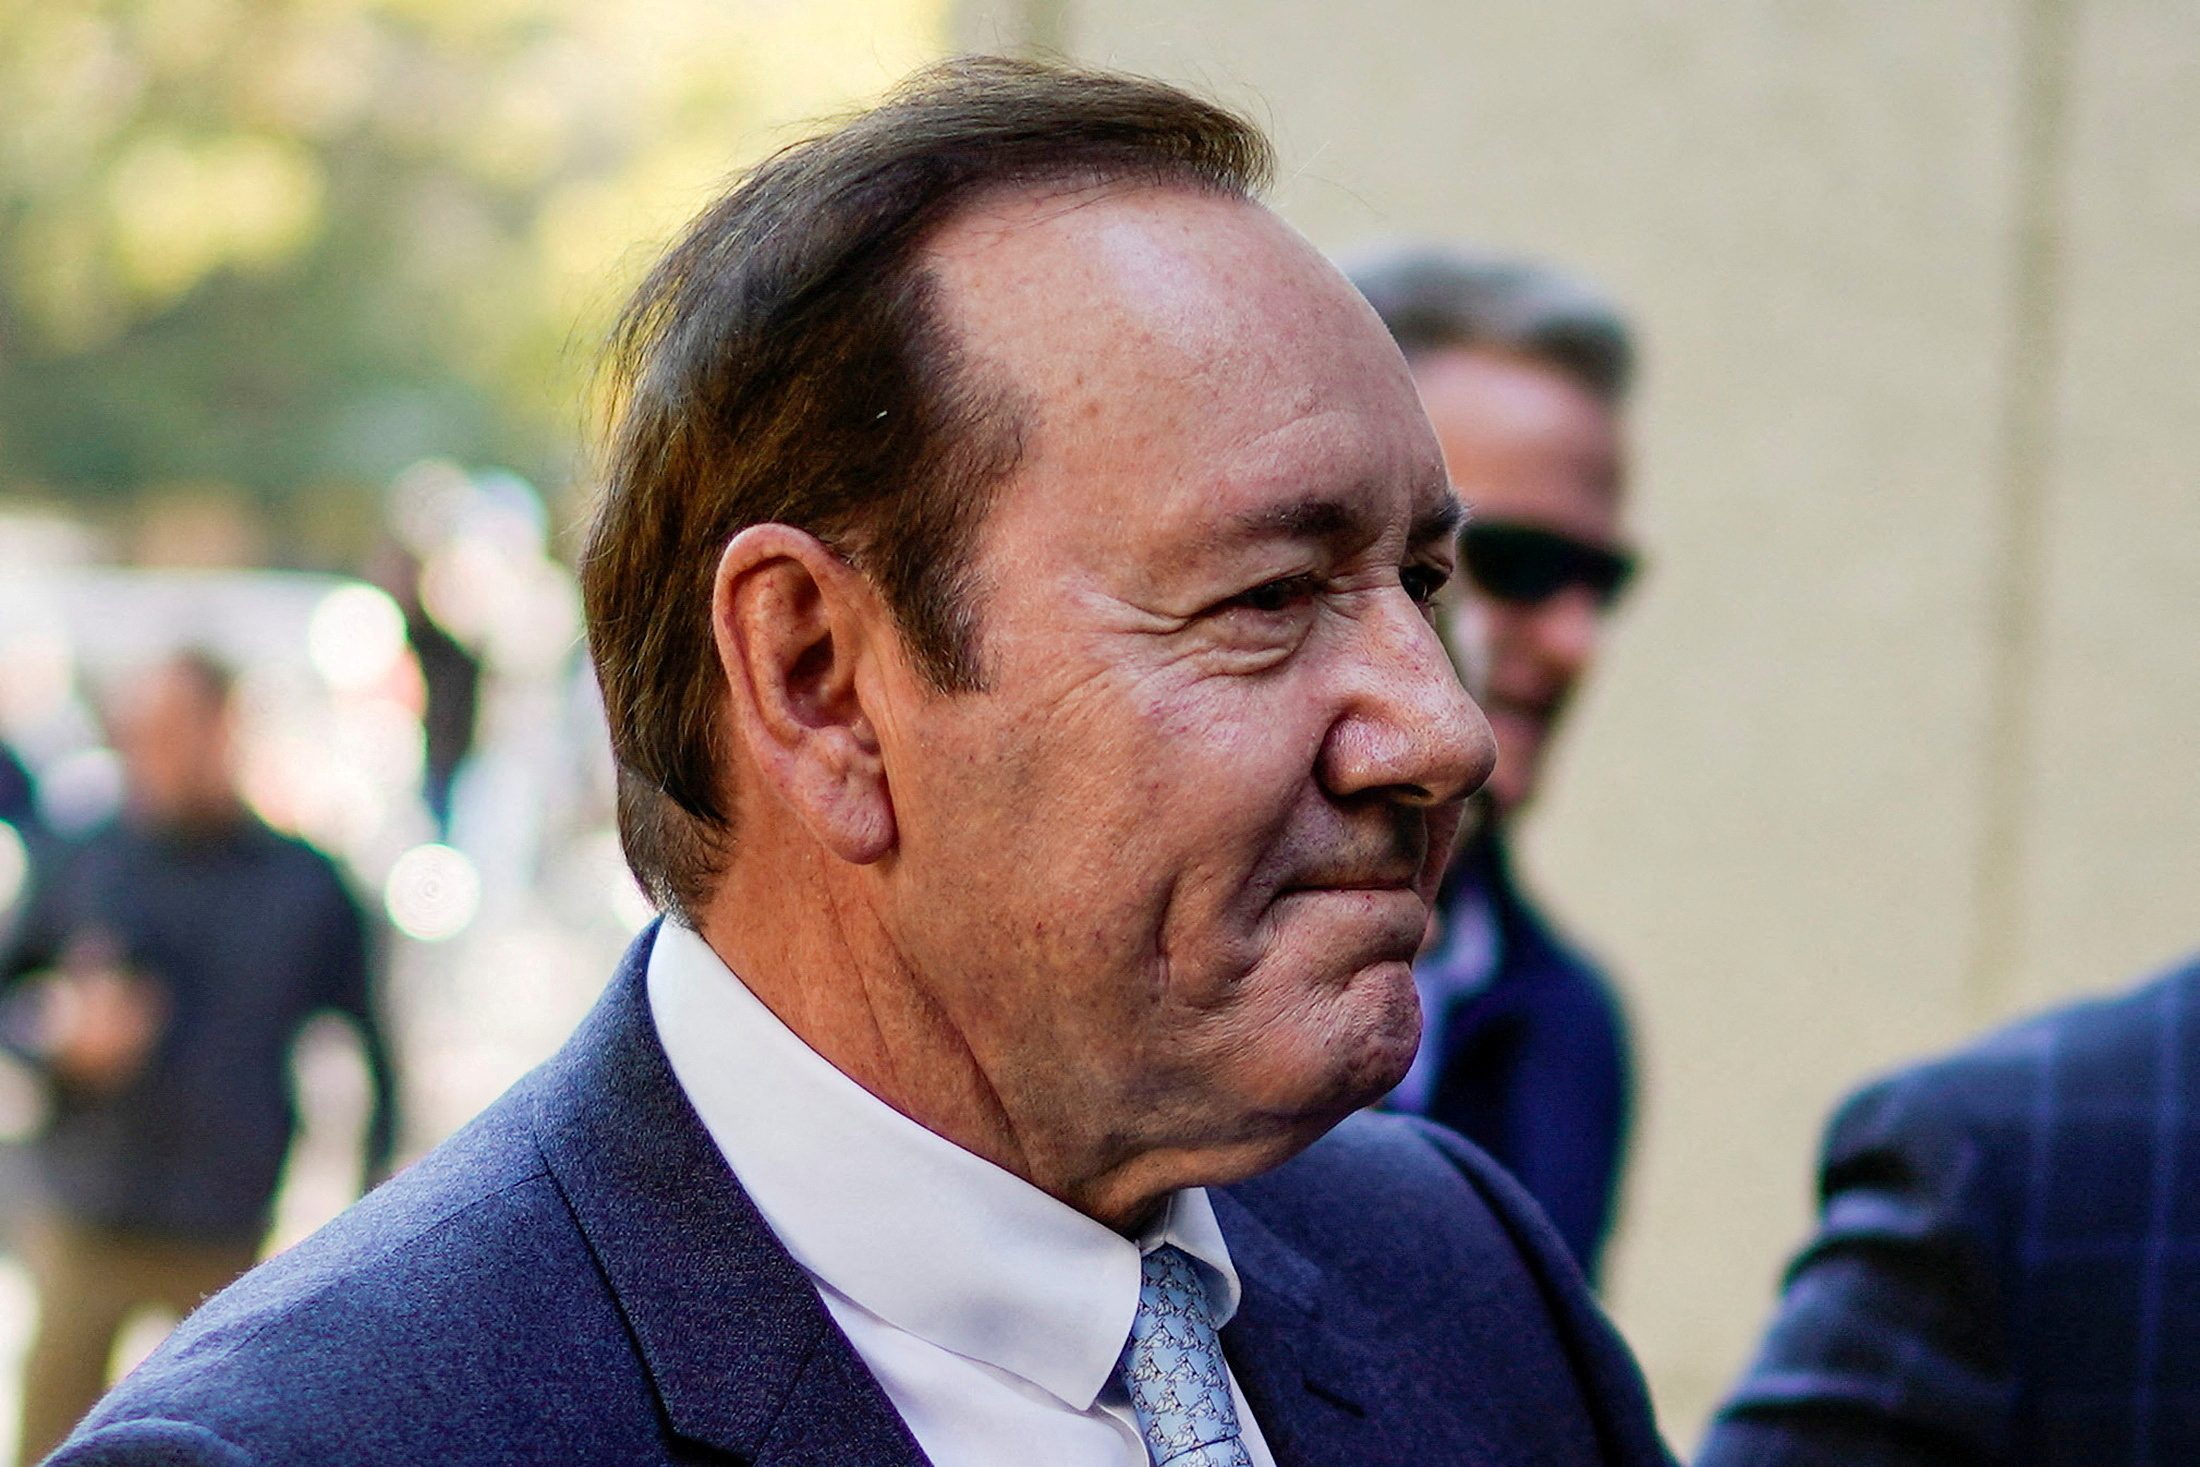 Kevin Spacey appears remotely in UK court over sex offense charges